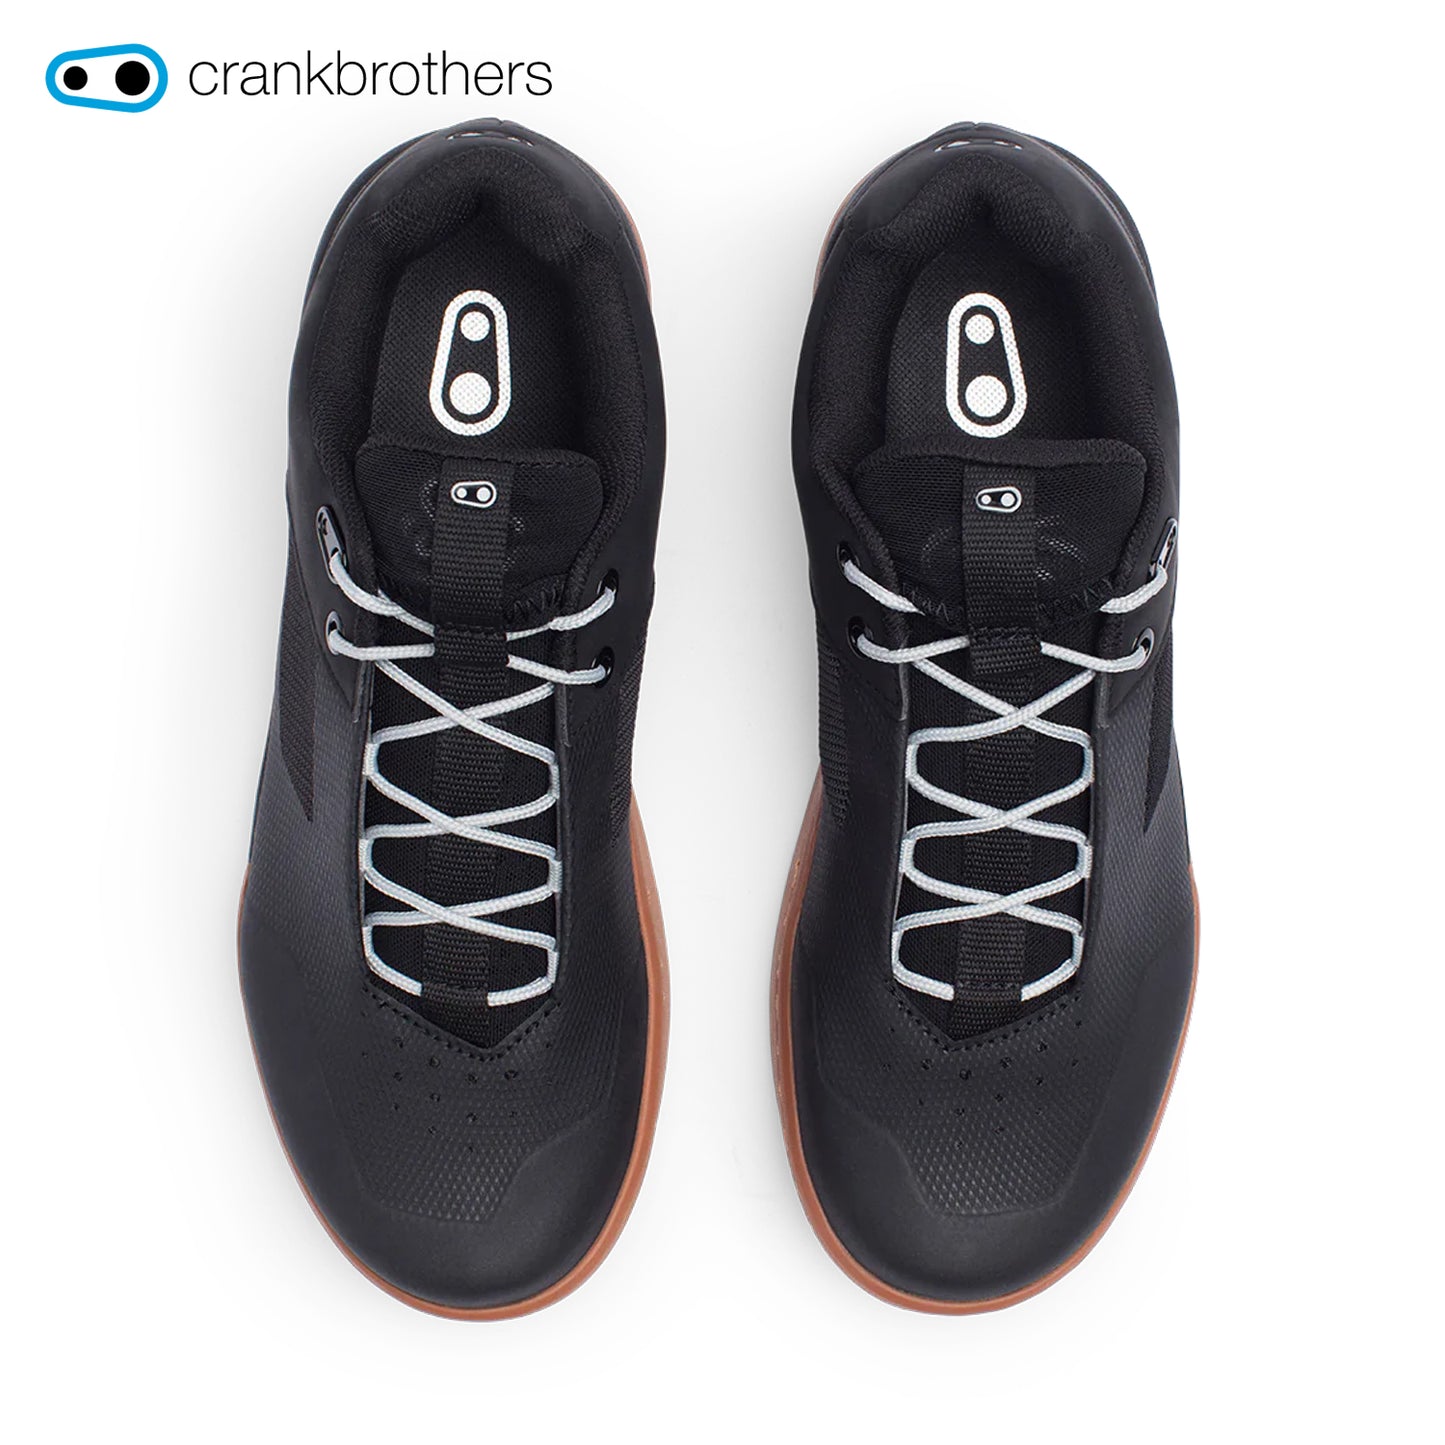 Crankbrothers Stamp Lace Flat Shoes - Black/Silver w/ Gum Outsole